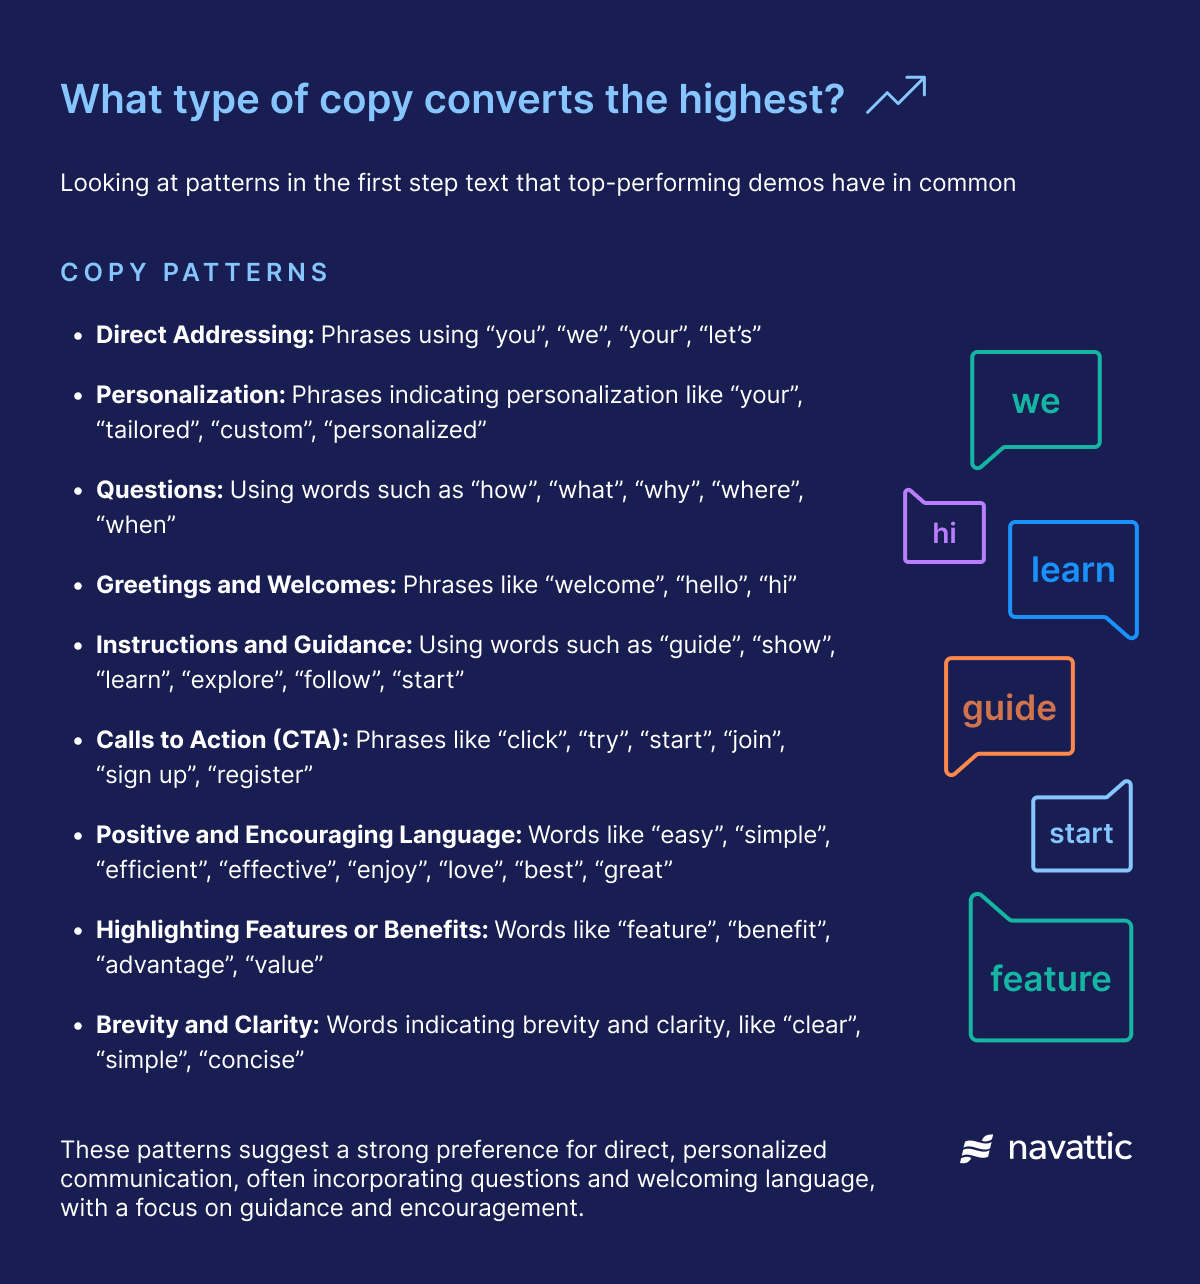 Breakdown of what type of copy converts the highest